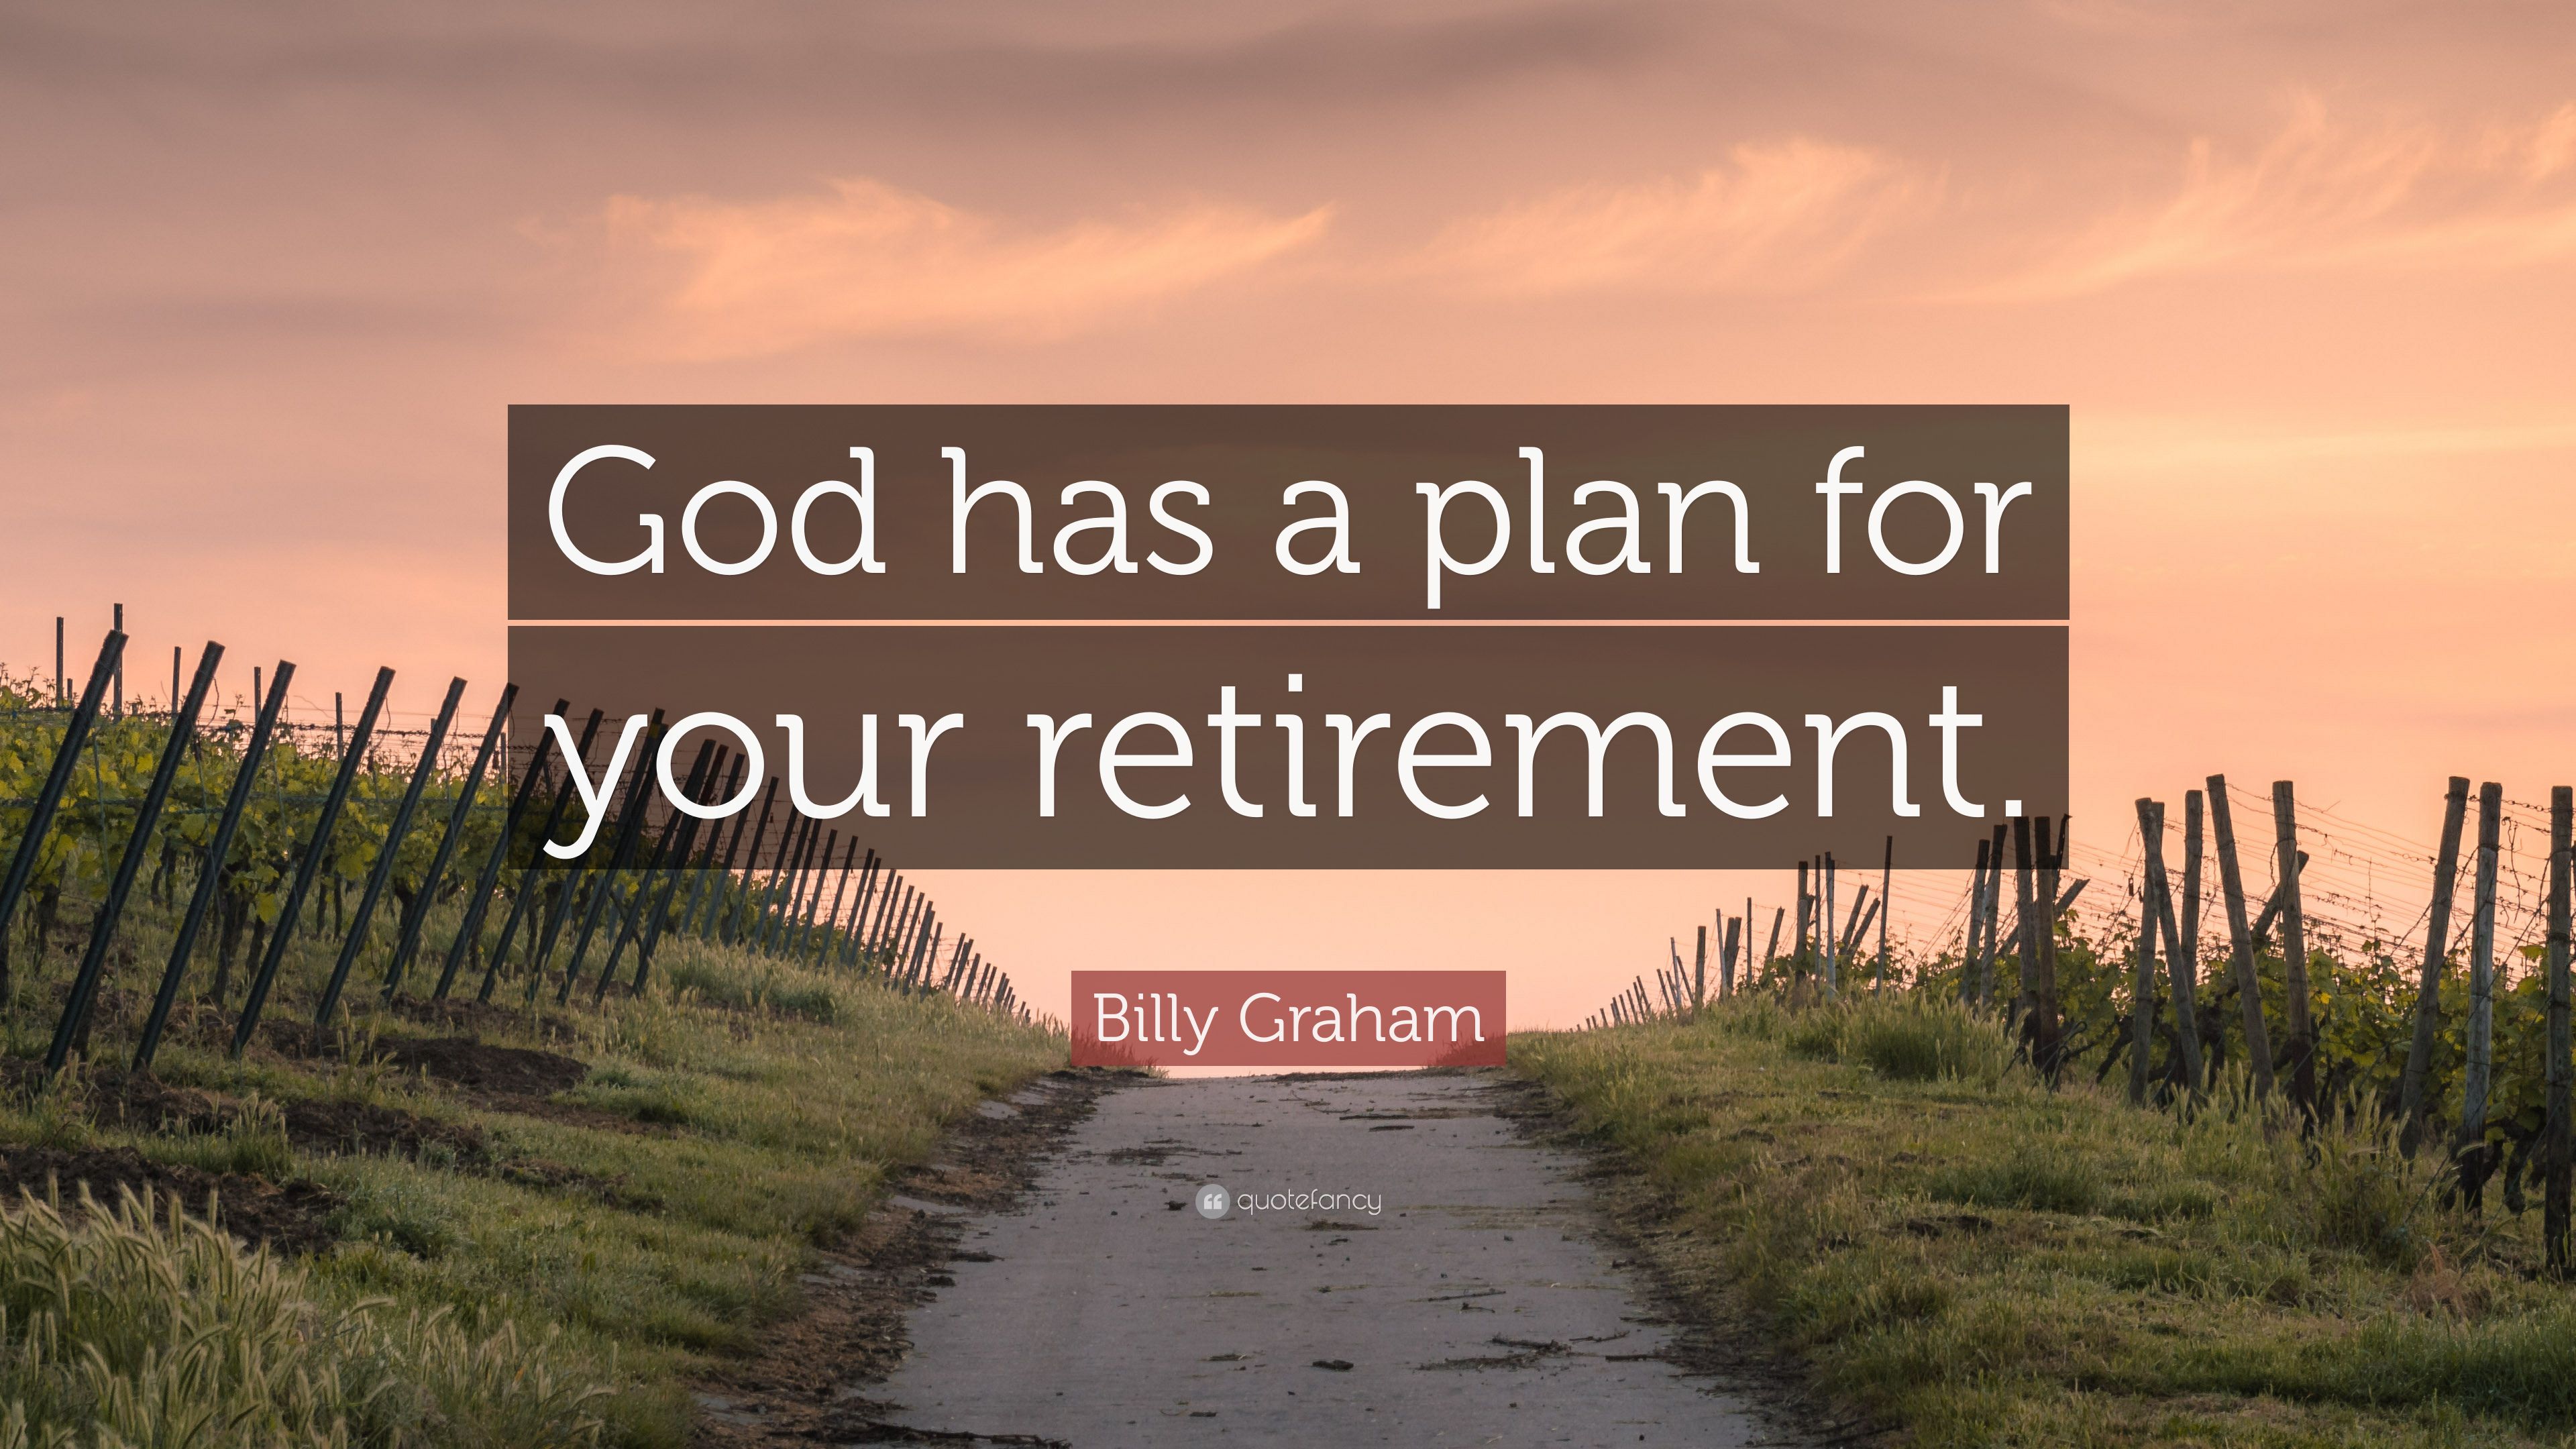 Billy Graham Quote: “God has a plan for your retirement.” 12